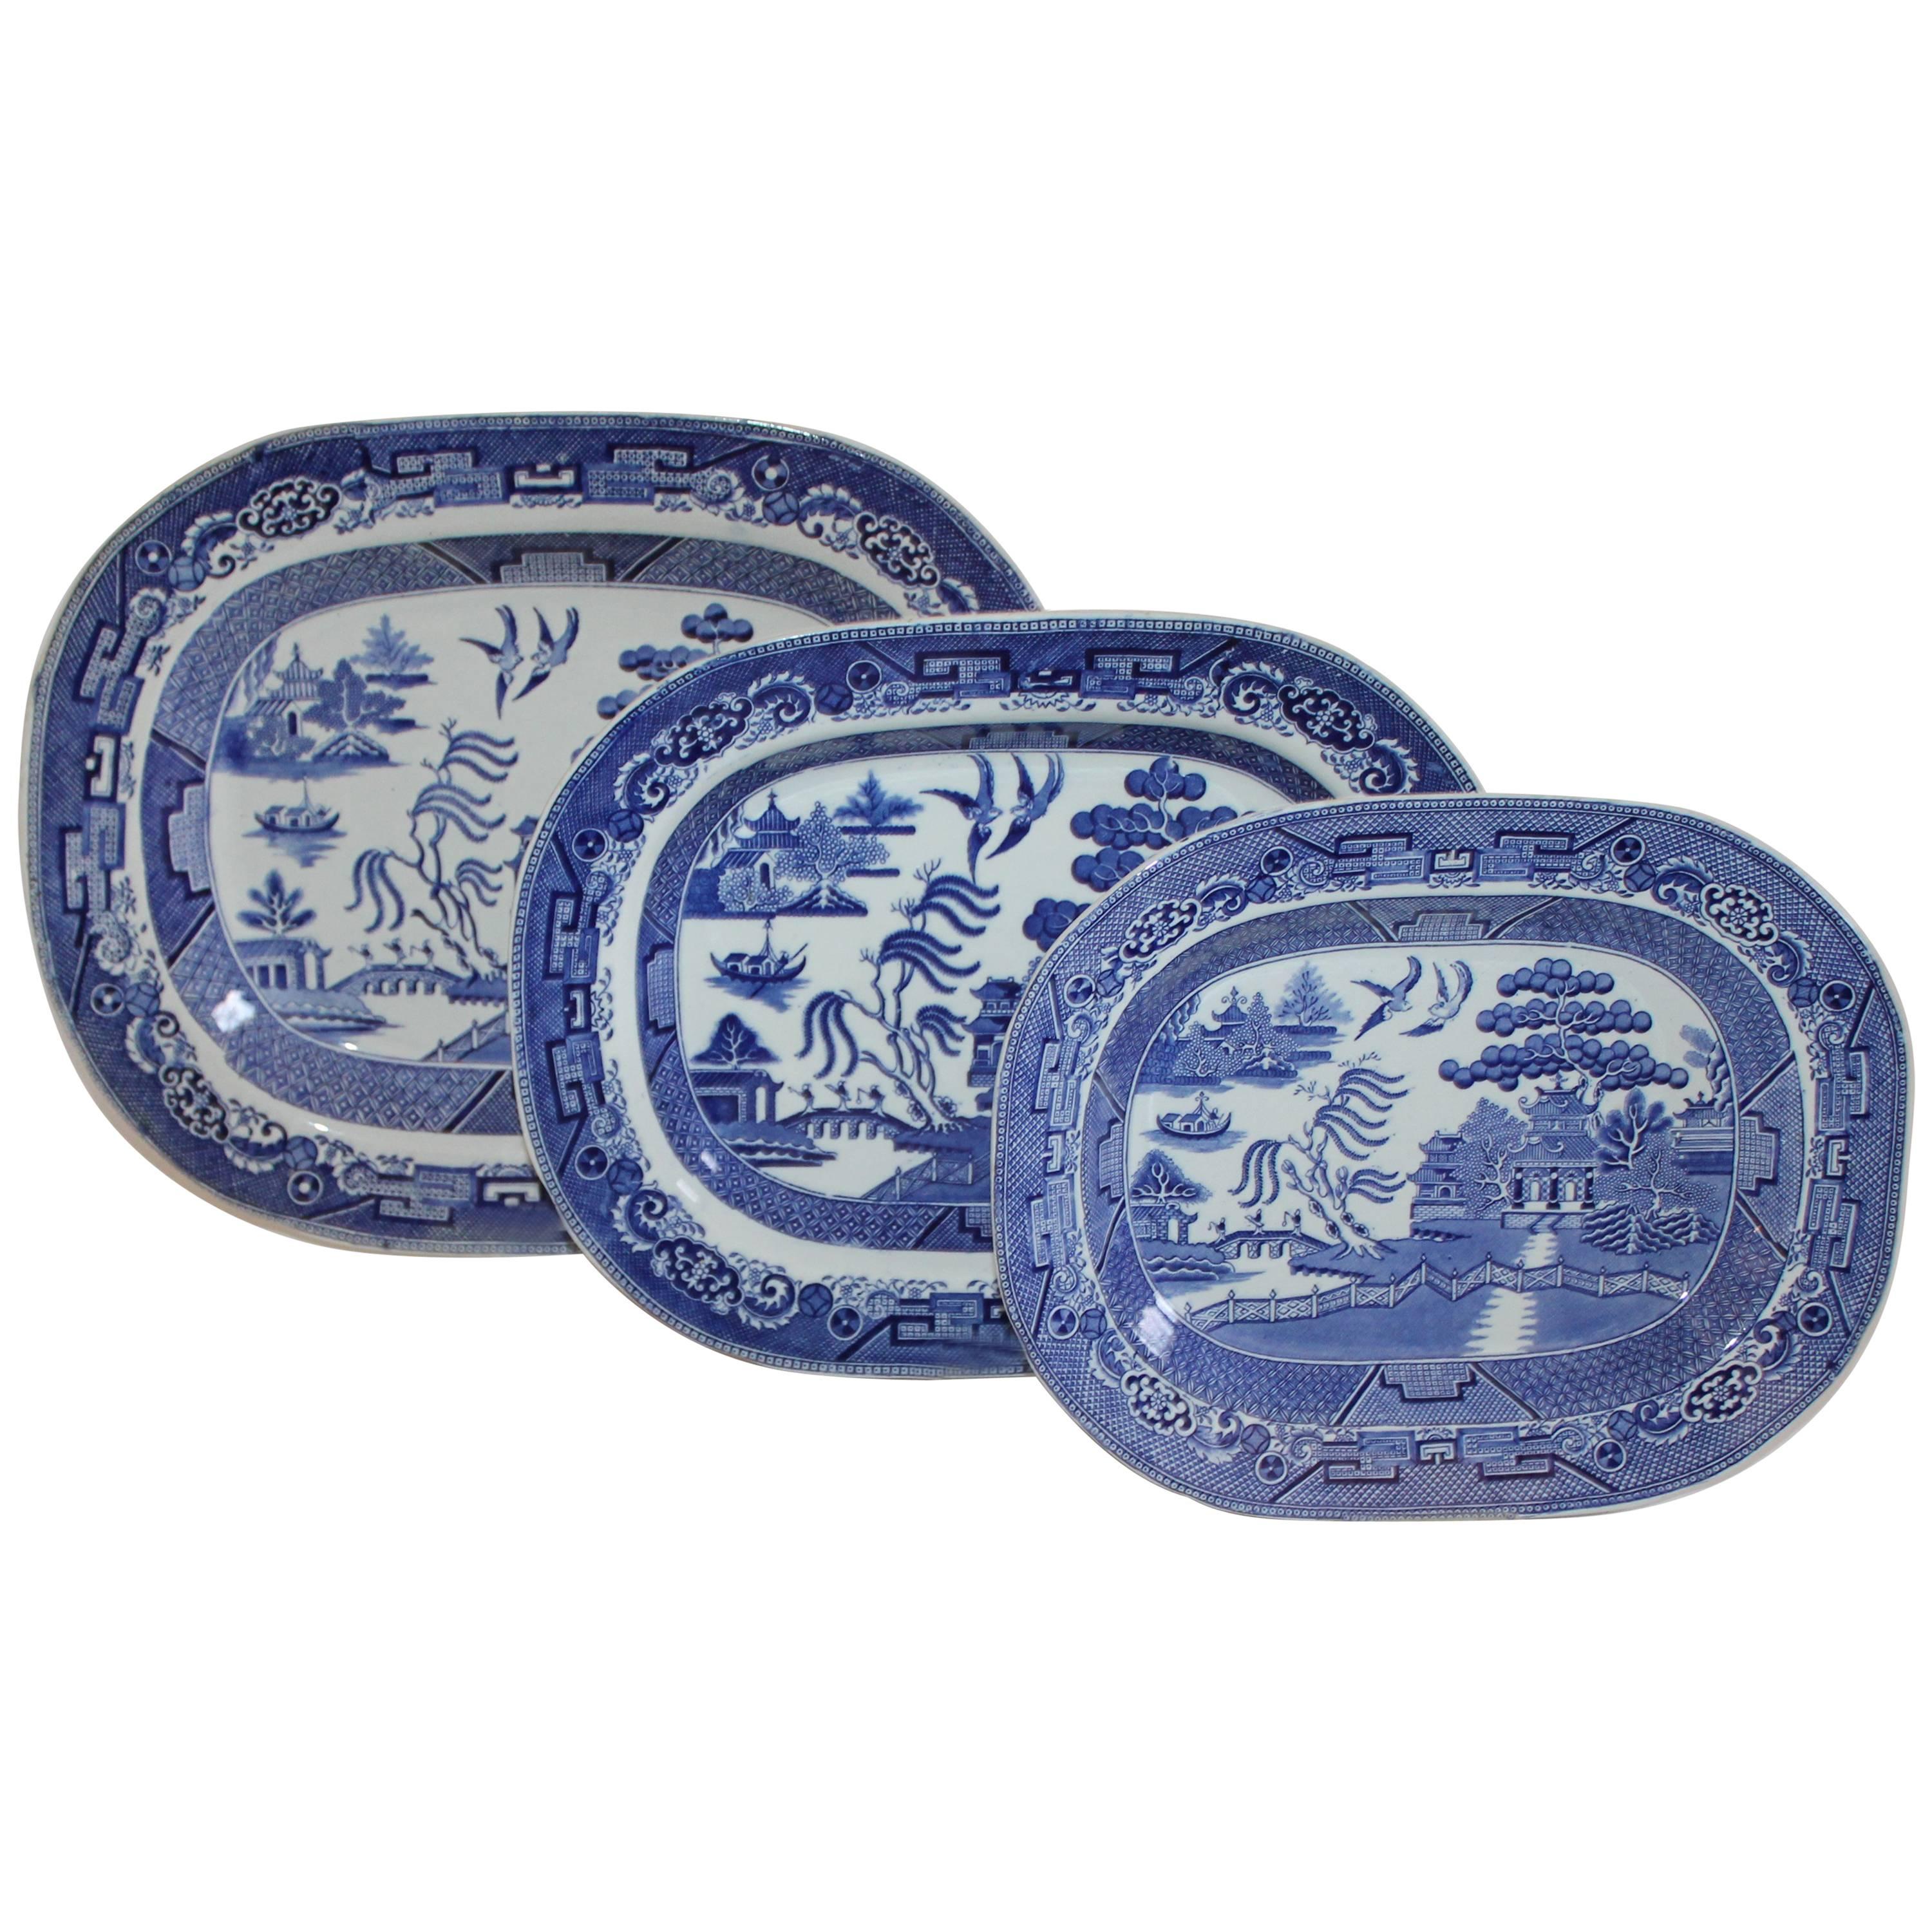 What is a Blue Willow plate?